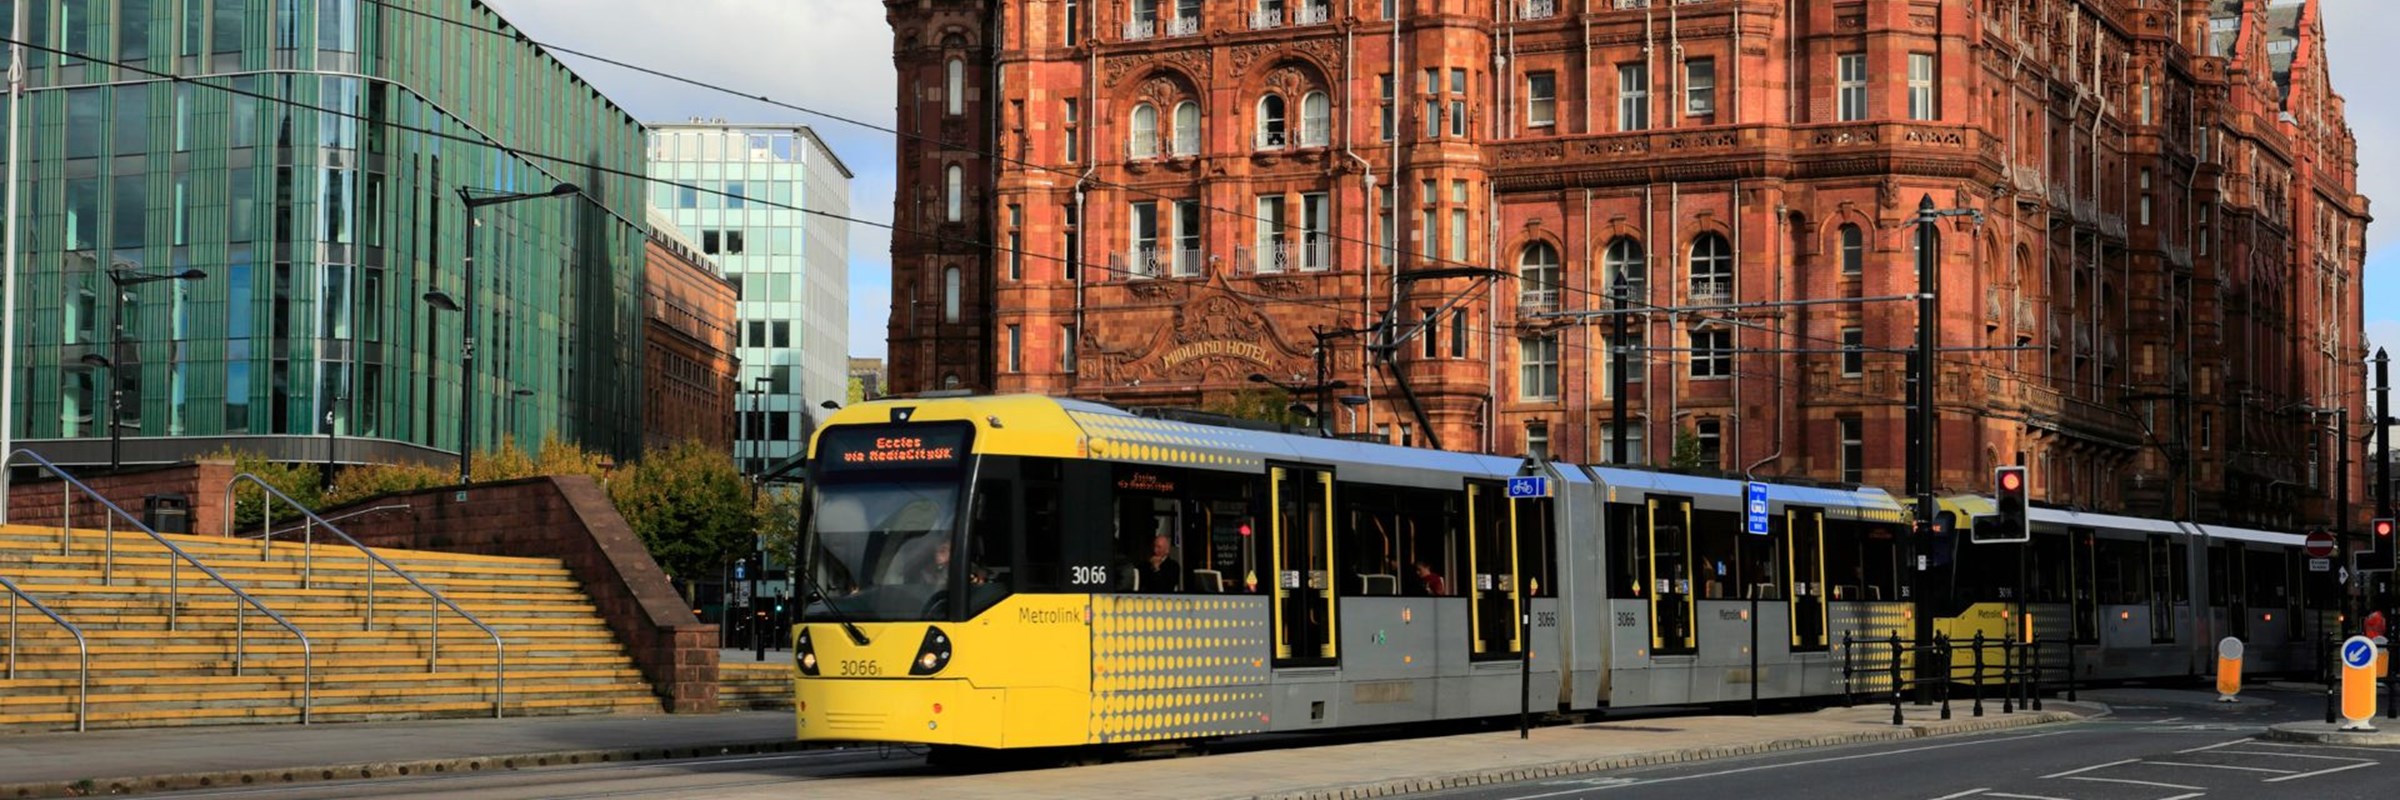 A yellow tram on the tracks in front of a large building in Manchester